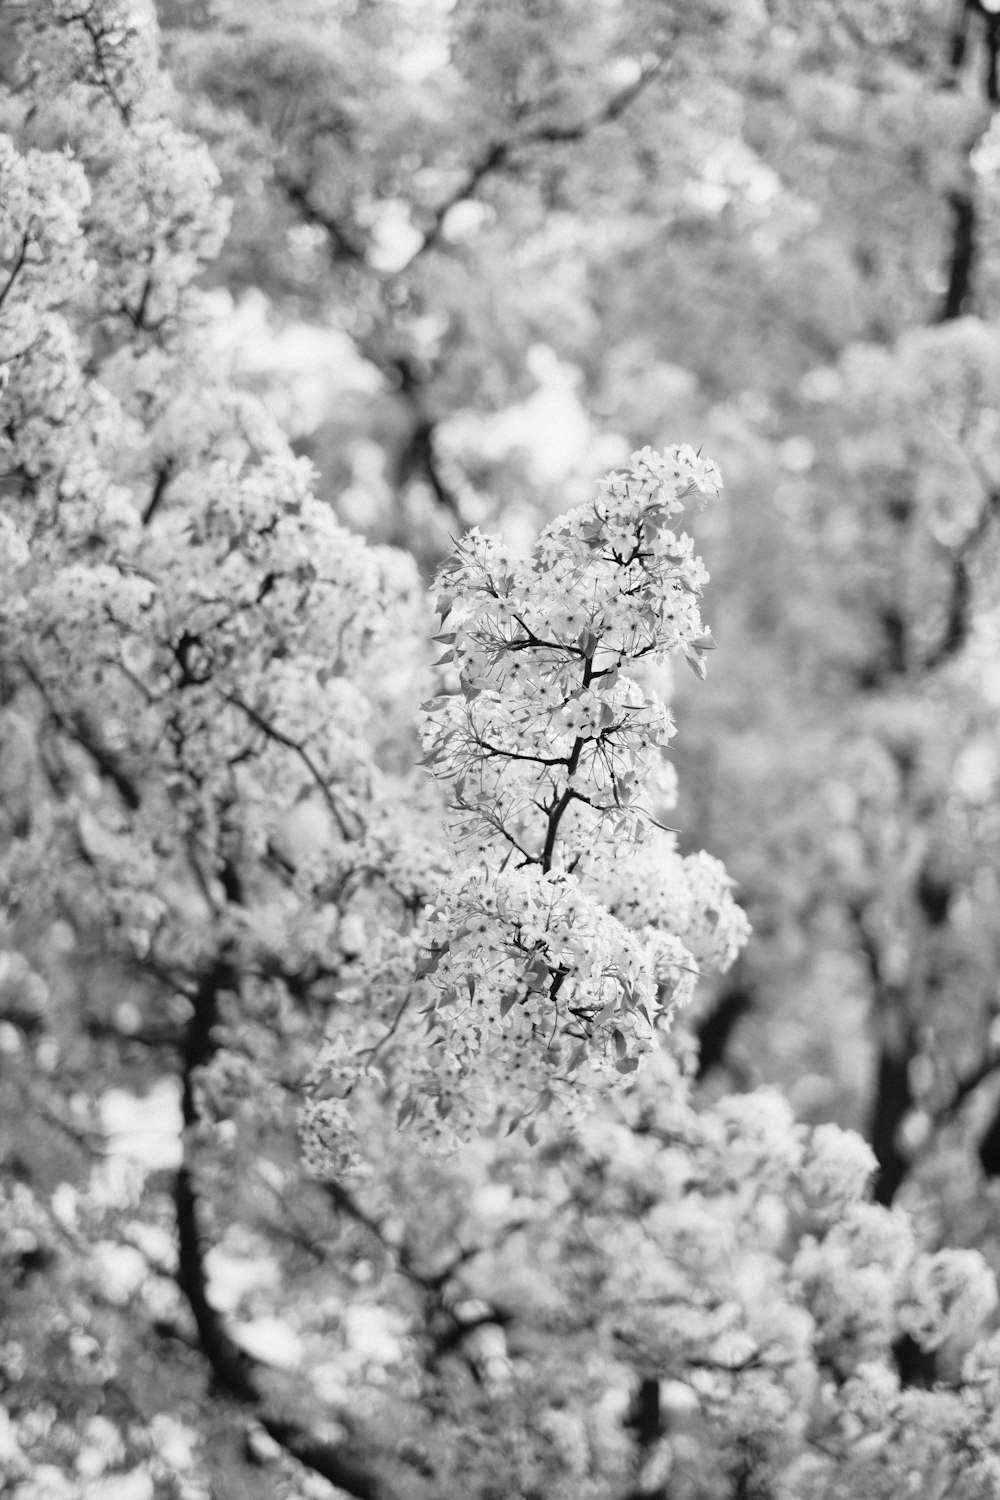 grayscale photo of cherry blossom